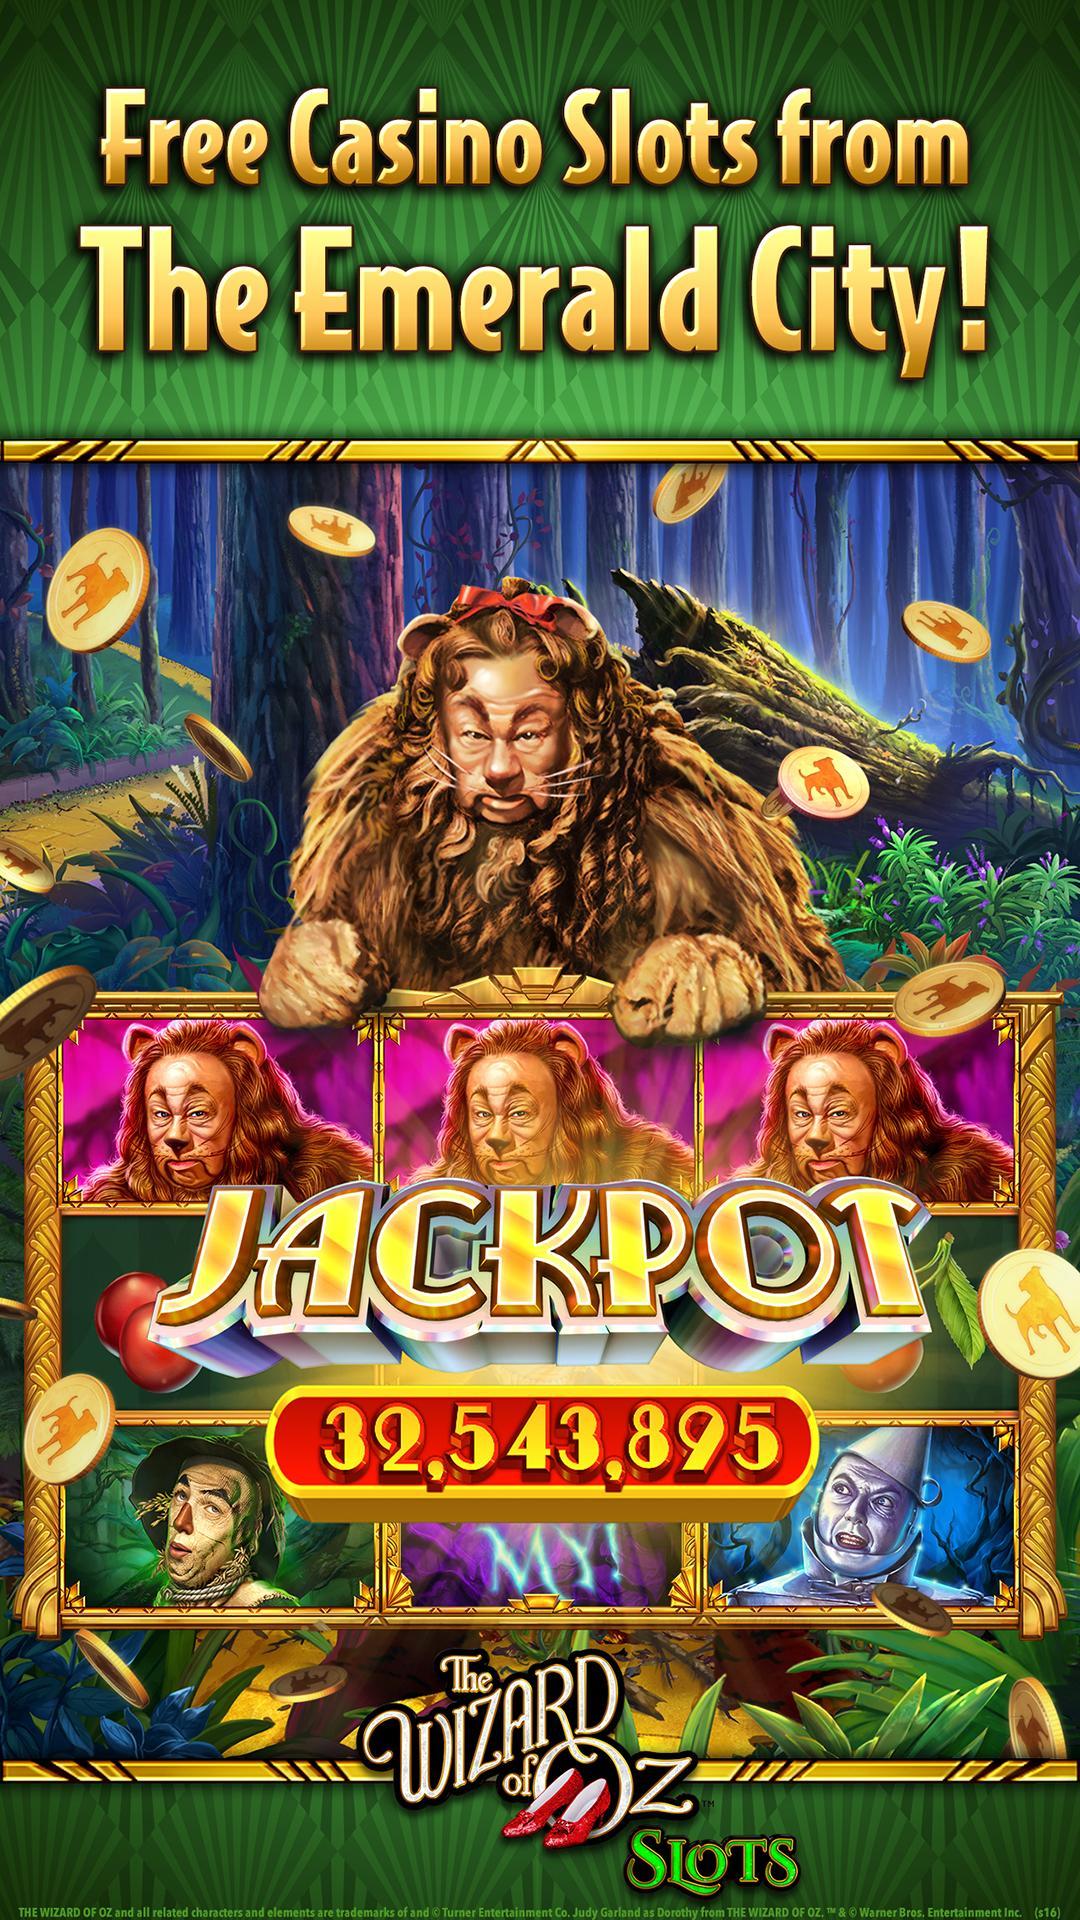 Wizard of oz casino free coins